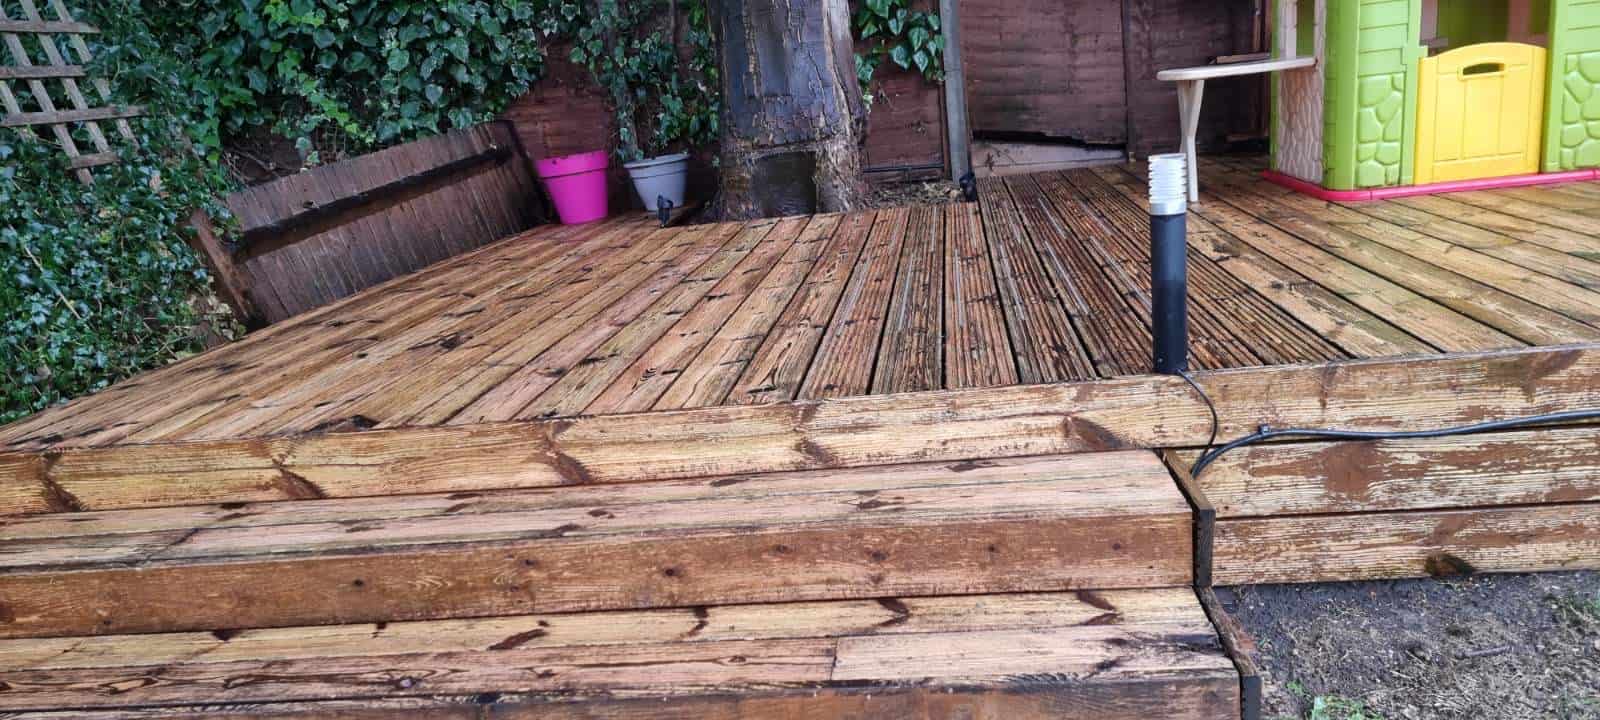 Decking repair services Finchley N3